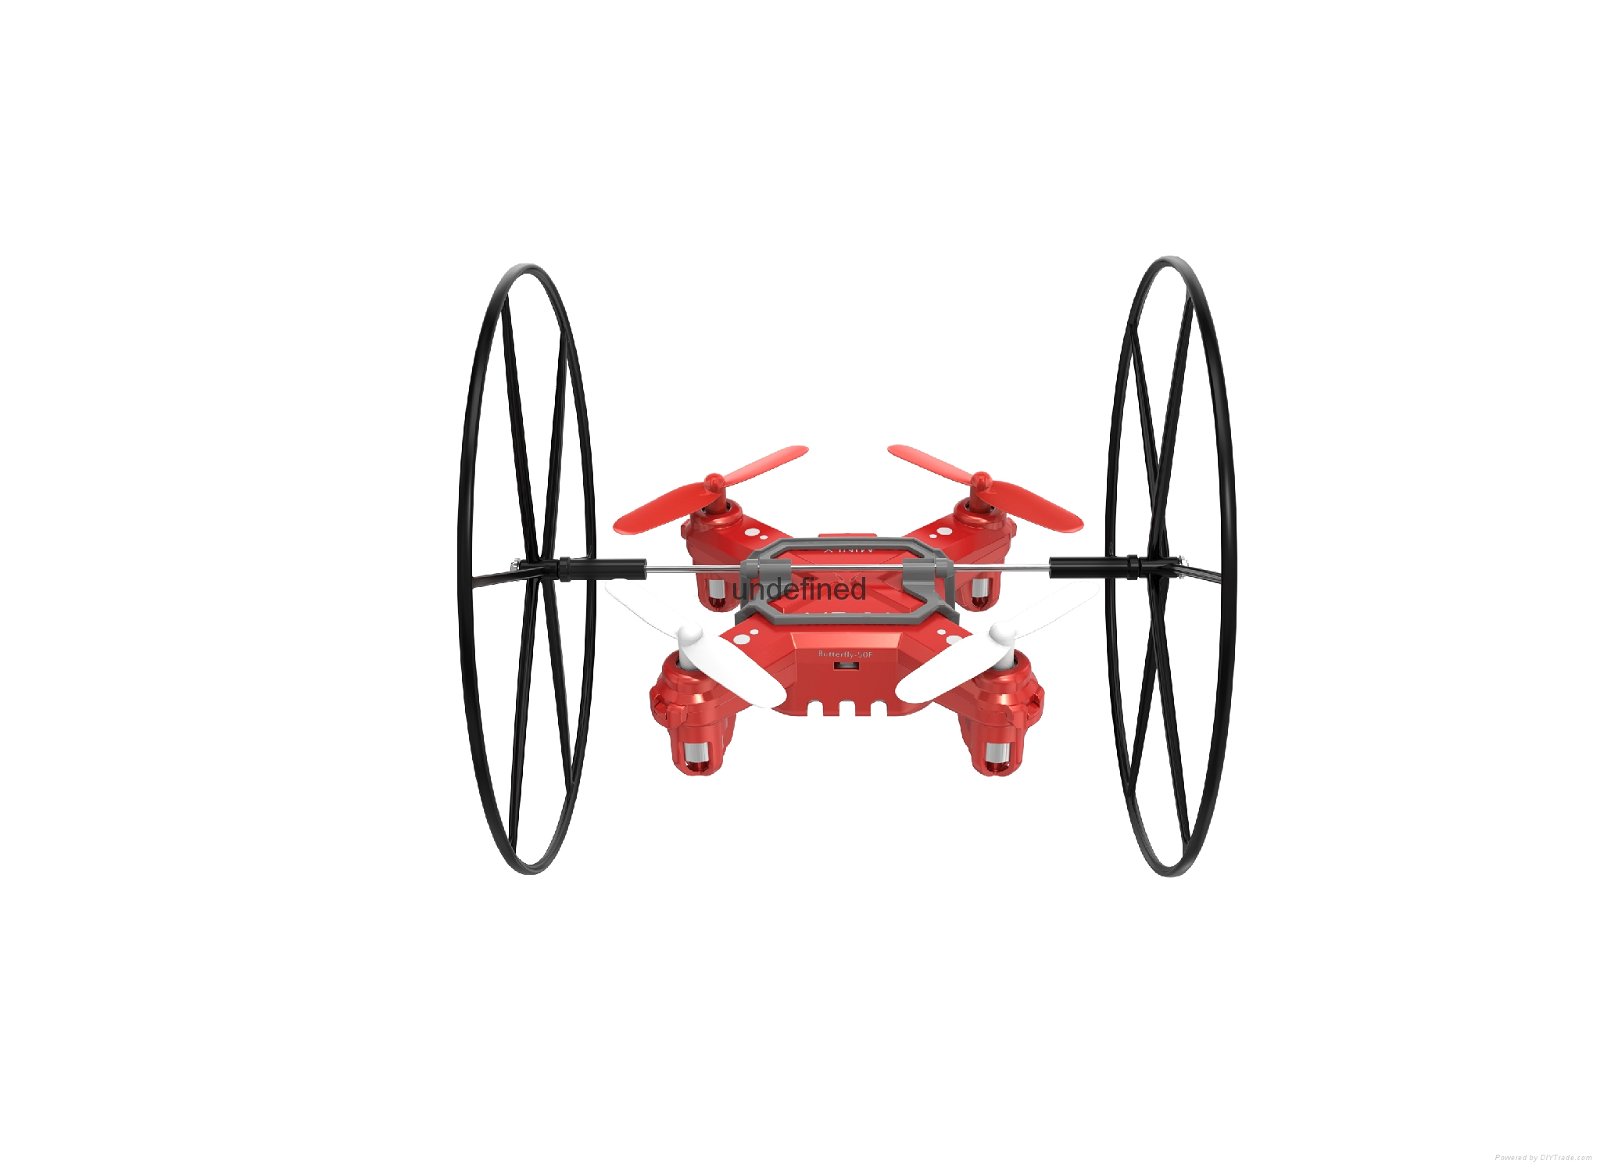 Apex Butterfly Quadcopter with Wheels 2.4G 6-Axis 4 Channels Uav Drone 5